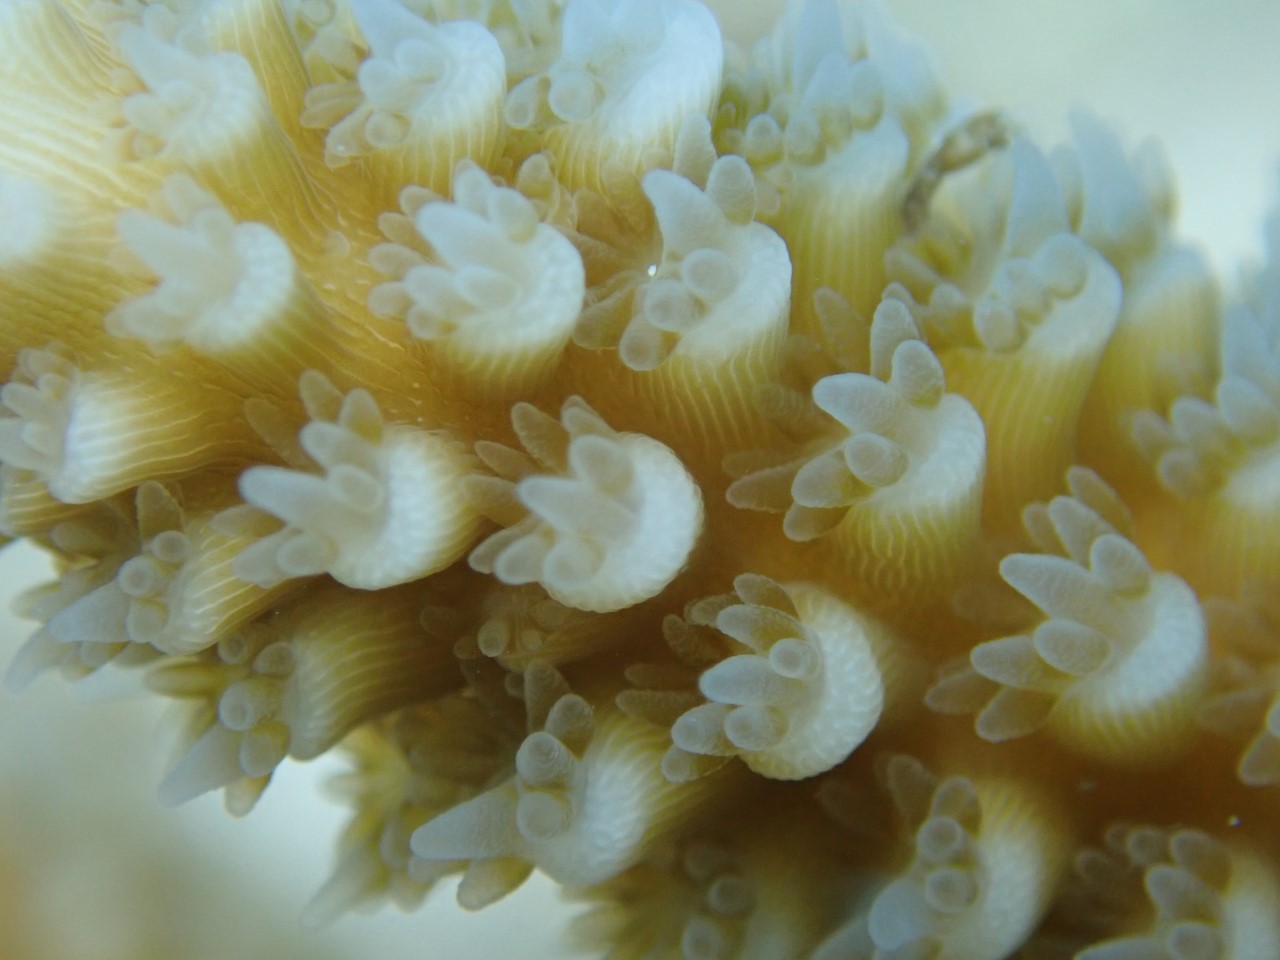 close-up of translucent polyps from an yellow A. cervicornis coral